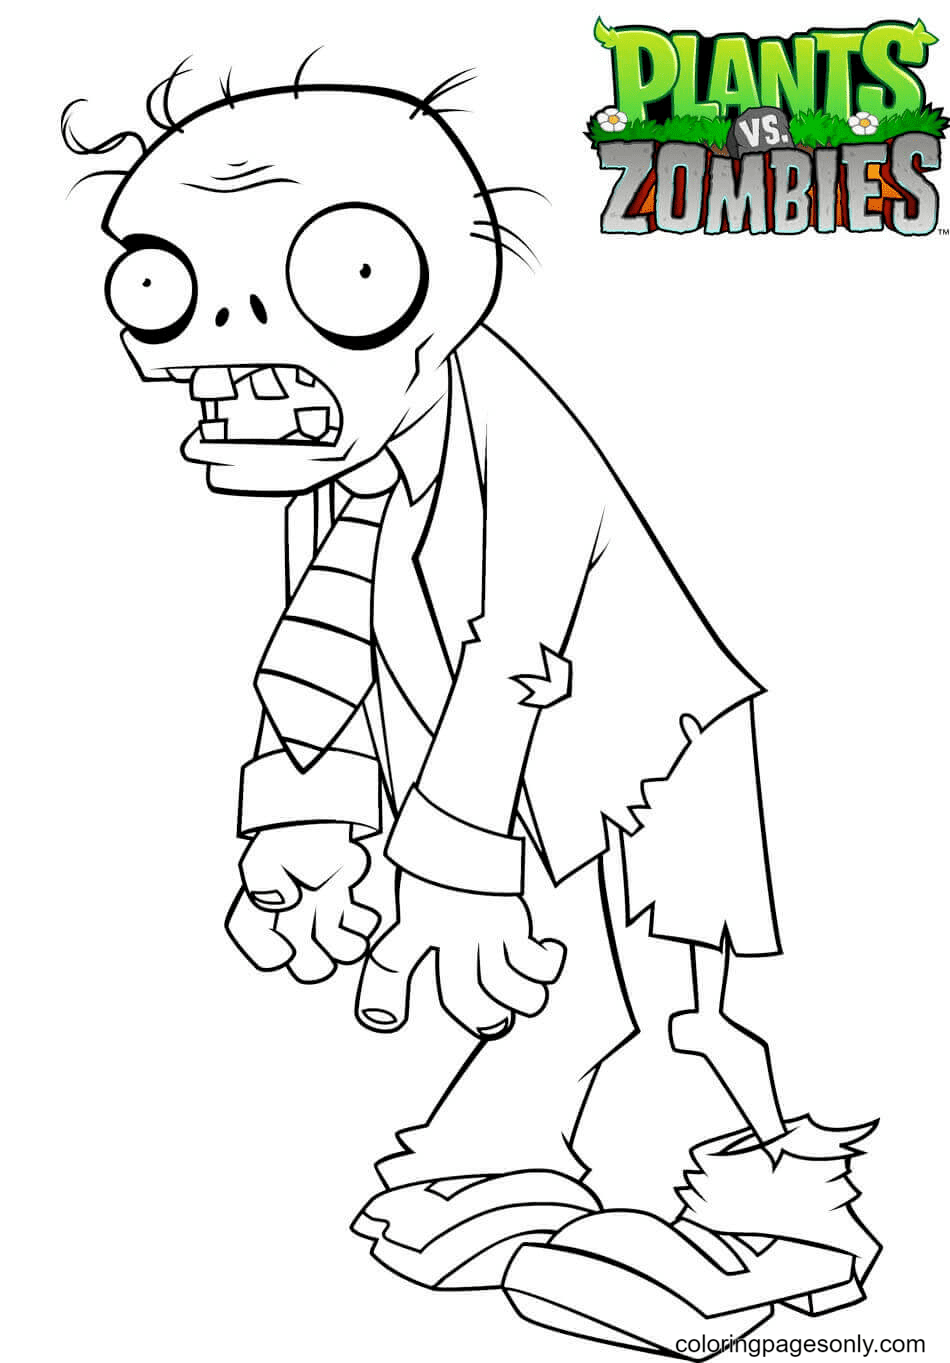 Gatling Pea Zombie Coloring Pages